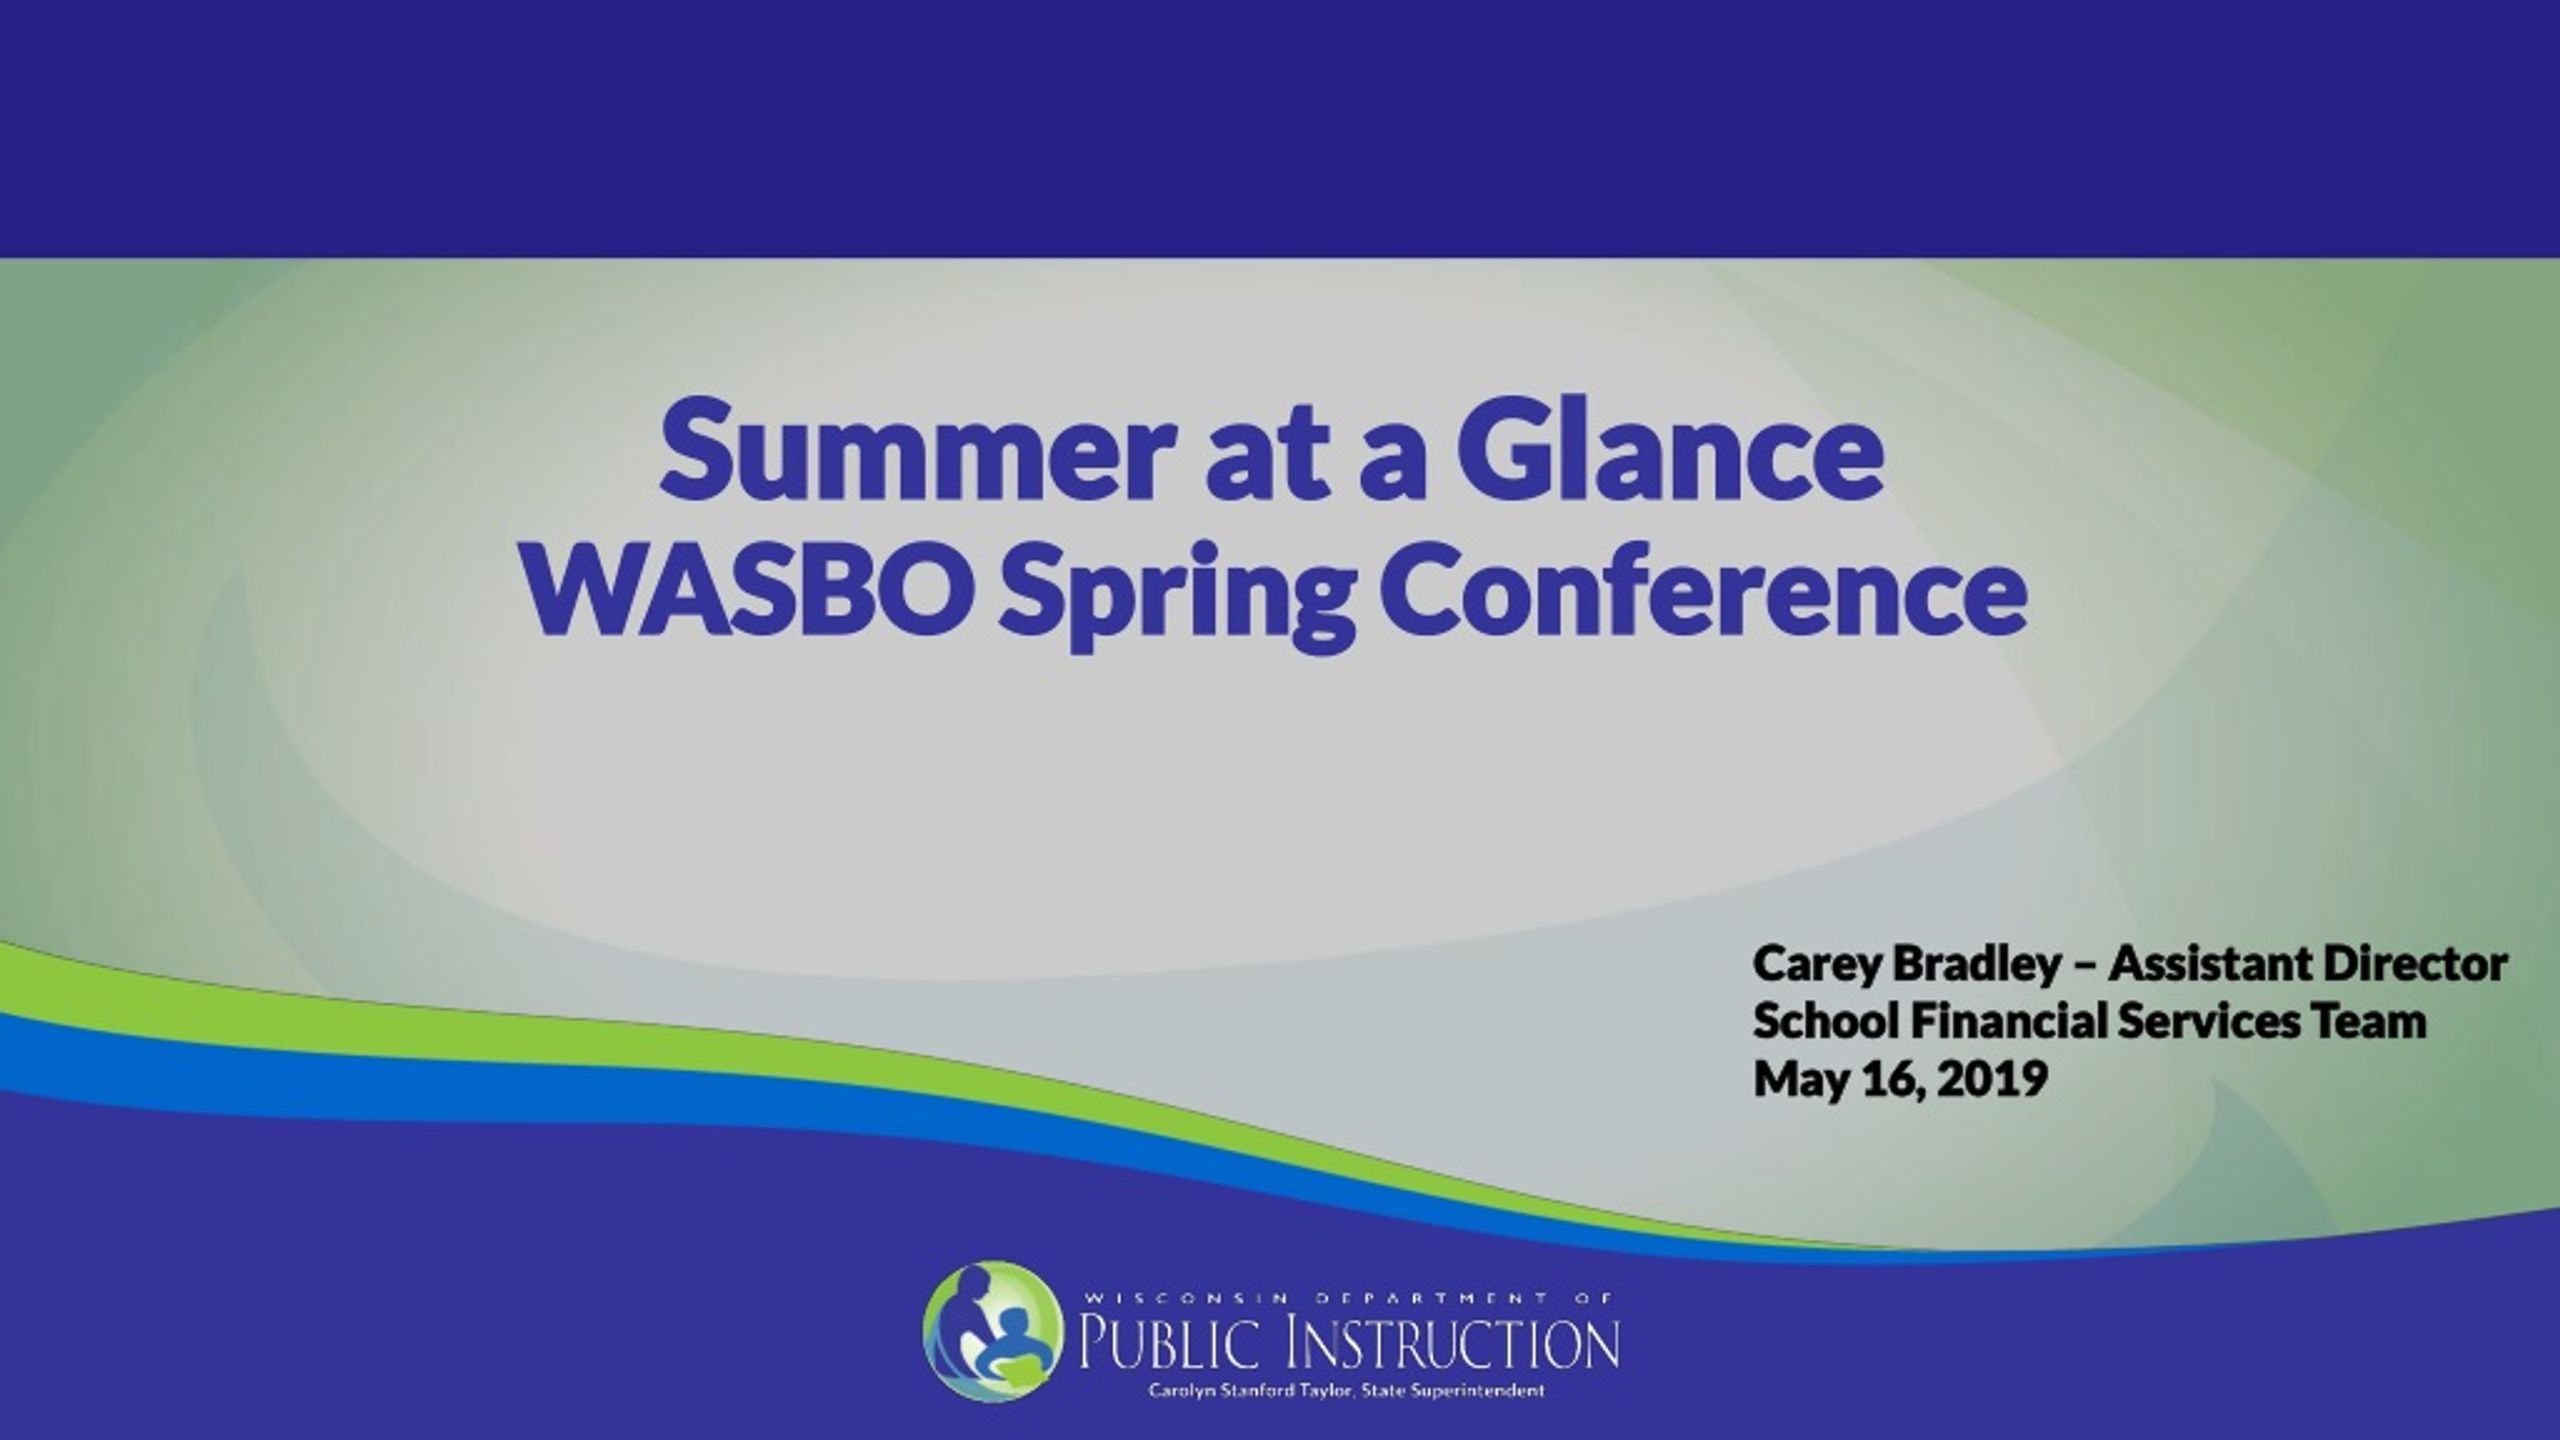 PPT Summer at a Glance WASBO Spring Conference PowerPoint